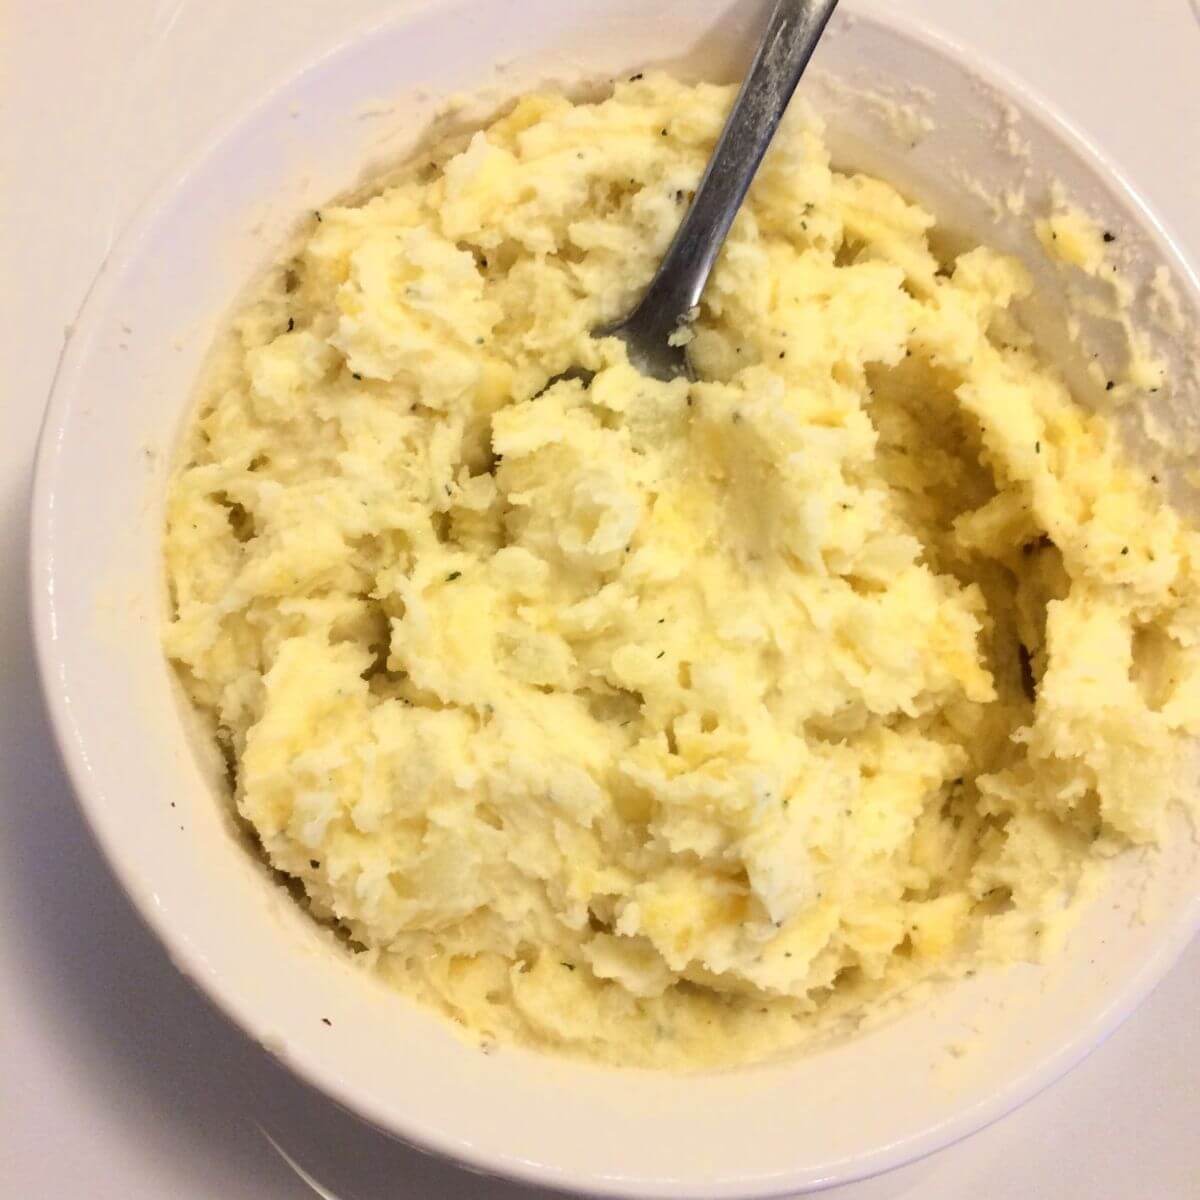 Mashed potato filling mixed with cheese, Greek yogurt, and spices in white bowl with white background and silver spoon in bowl.